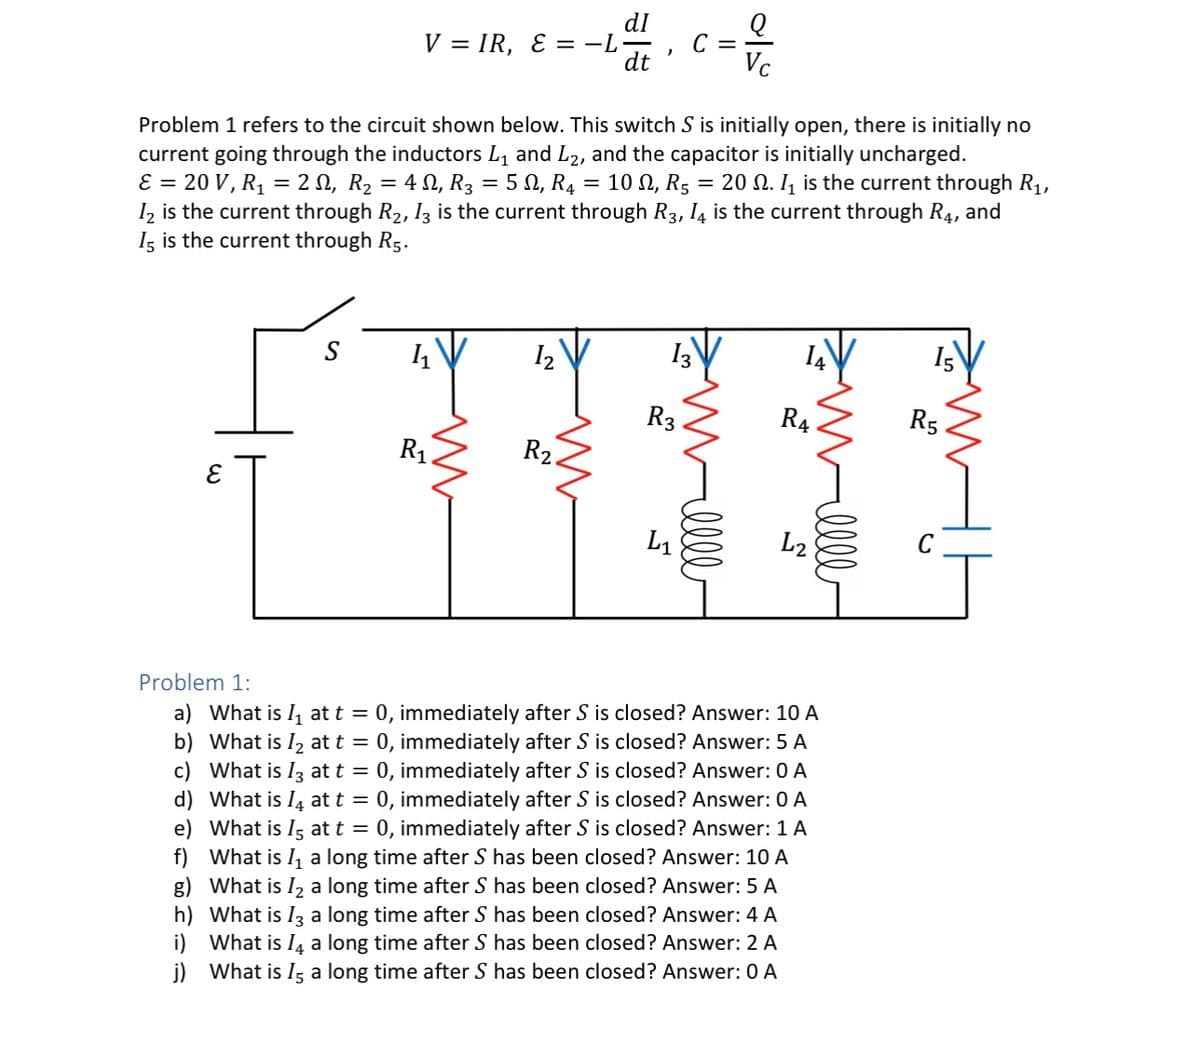 V=IR, E = −L−
C =
dt
050
Q
Vc
= 2, R₂ = 42, R3 = 502, R4
=
10 Ω, R5
=
Problem 1 refers to the circuit shown below. This switch S is initially open, there is initially no
current going through the inductors L1 and L2, and the capacitor is initially uncharged.
E = 20 V, R₁
20. ₁ is the current through R₁,
12 is the current through R2, I3 is the current through R3, 14 is the current through R, and
15 is the current through R5.
3
15
13
11
12
R3
R4
R5
R₁.
R2.
L₁
ееее
L2
Problem 1:
a) What is ₁ at t = 0, immediately after S is closed? Answer: 10 A
b) What is 12 at t = 0, immediately after S is closed? Answer: 5 A
c) What is 13 at t = 0, immediately after S is closed? Answer: 0 A
d) What is Į at t = 0, immediately after S is closed? Answer: 0 A
e) What is 15 at t = 0, immediately after S is closed? Answer: 1 A
f) What is I₁ a long time after S has been closed? Answer: 10 A
g) What is 12 a long time after S has been closed? Answer: 5 A
h) What is 13 a long time after S has been closed? Answer: 4 A
i) What is 14 a long time after S has been closed? Answer: 2 A
j) What is 15 a long time after S has been closed? Answer: 0 A